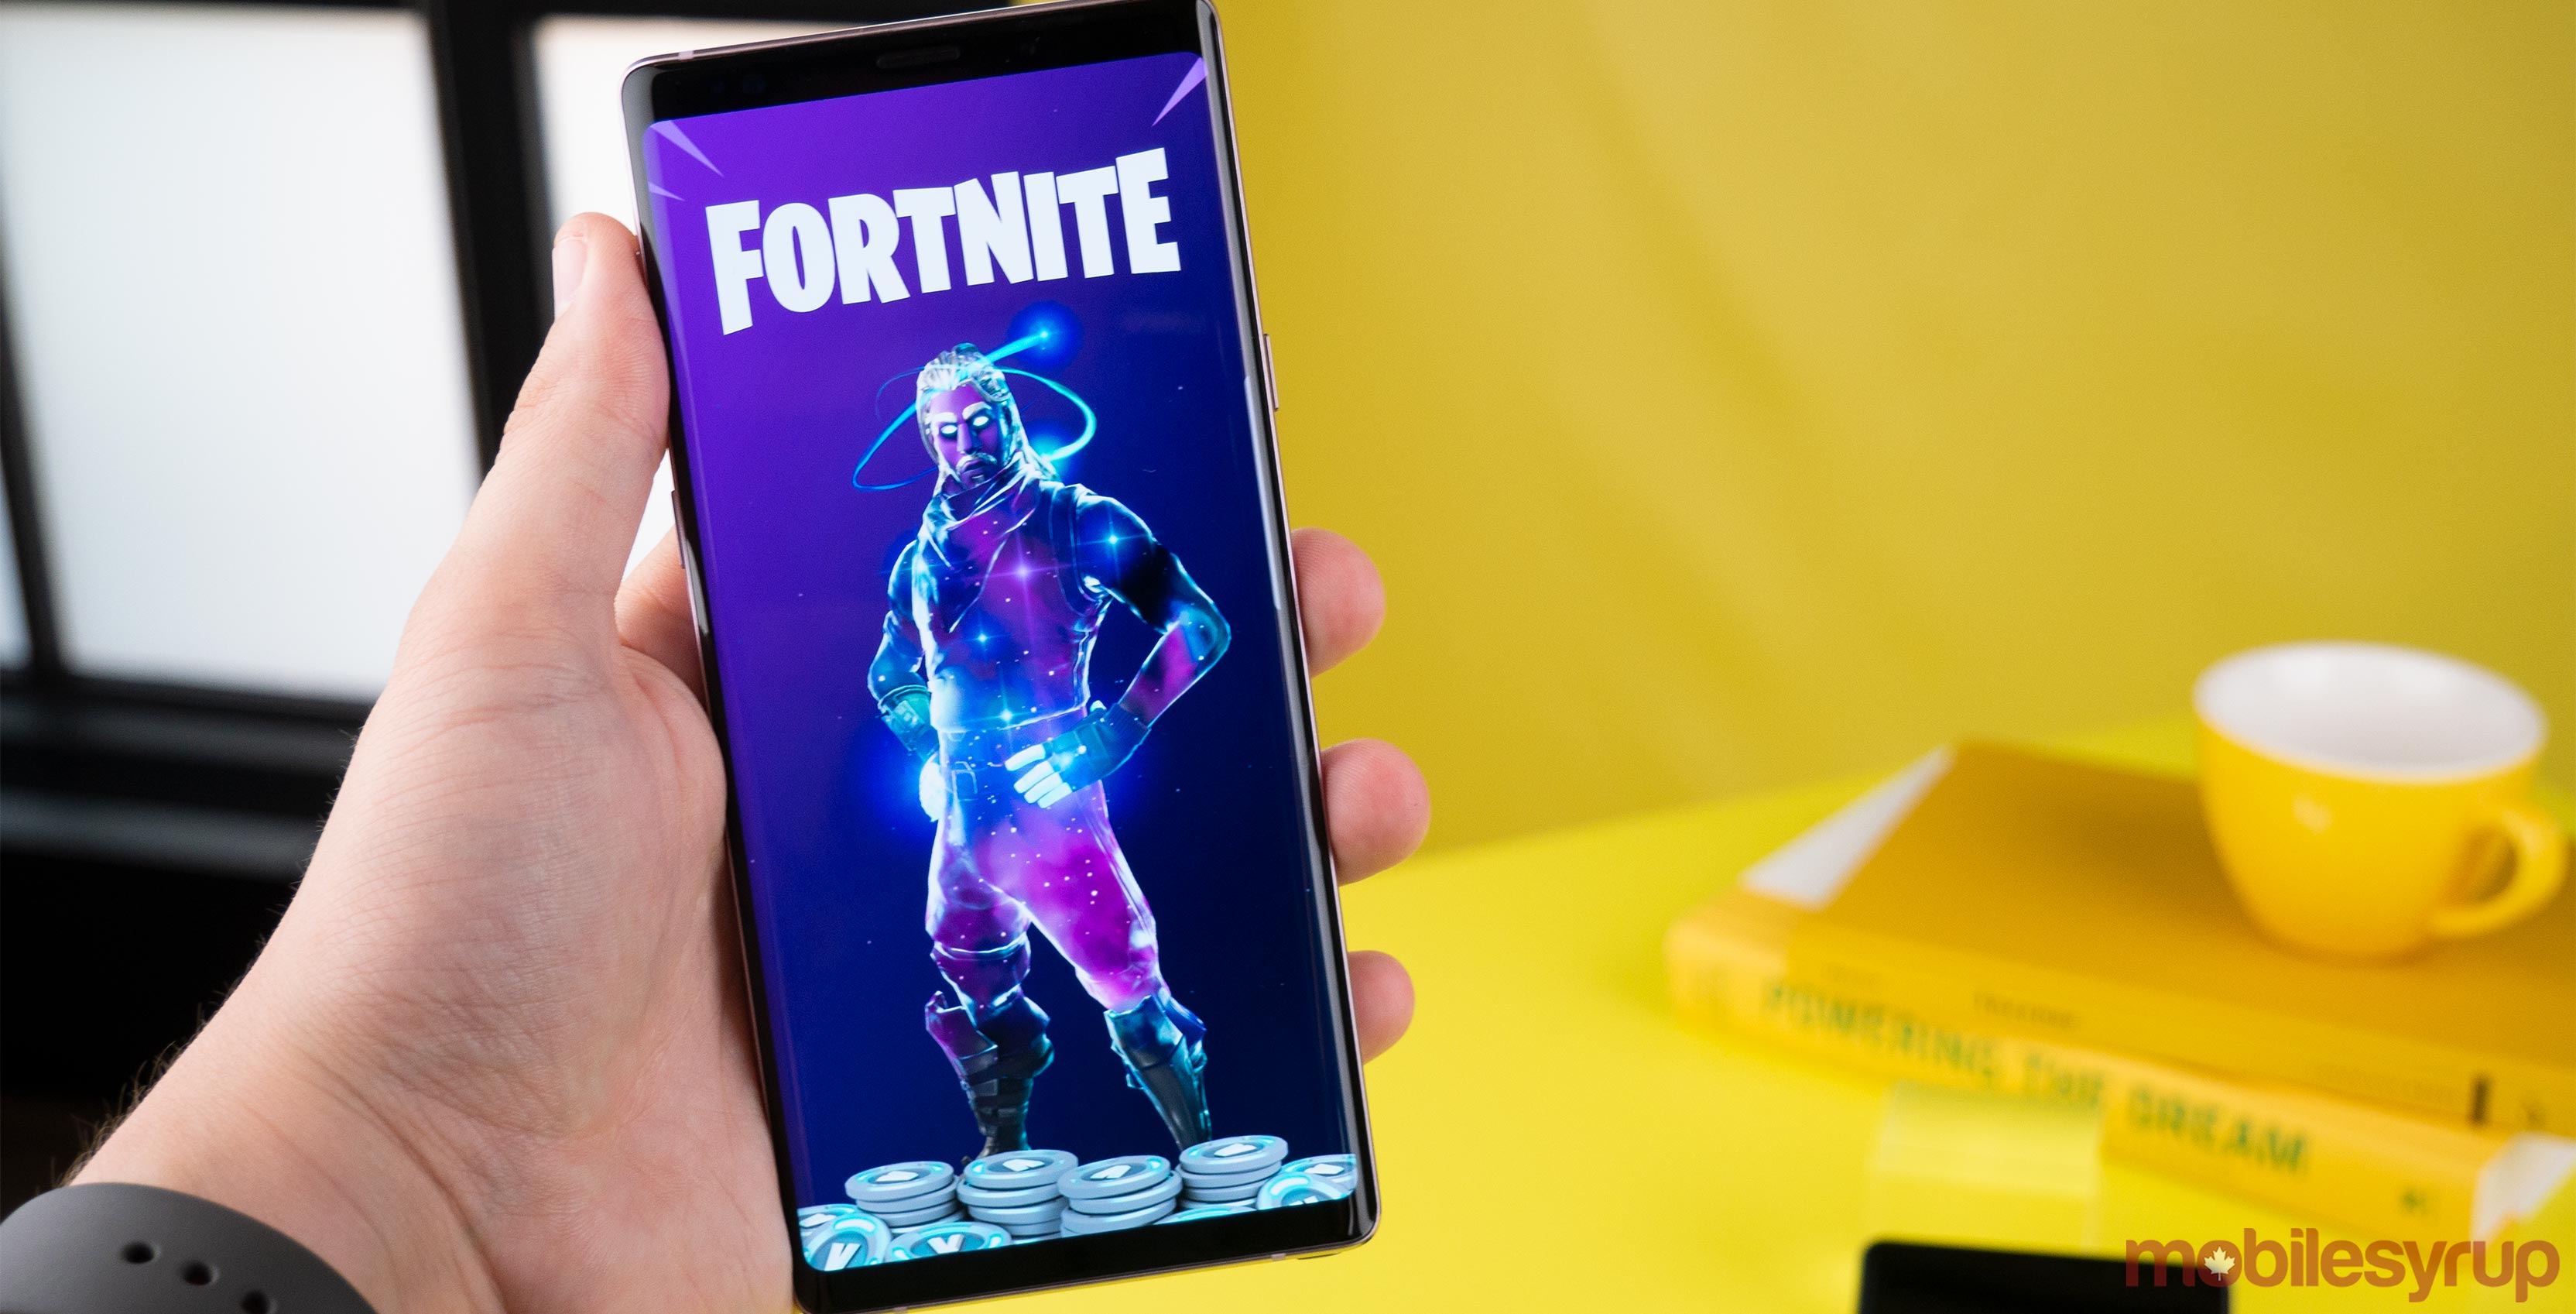 Fortnite for mobile android beta